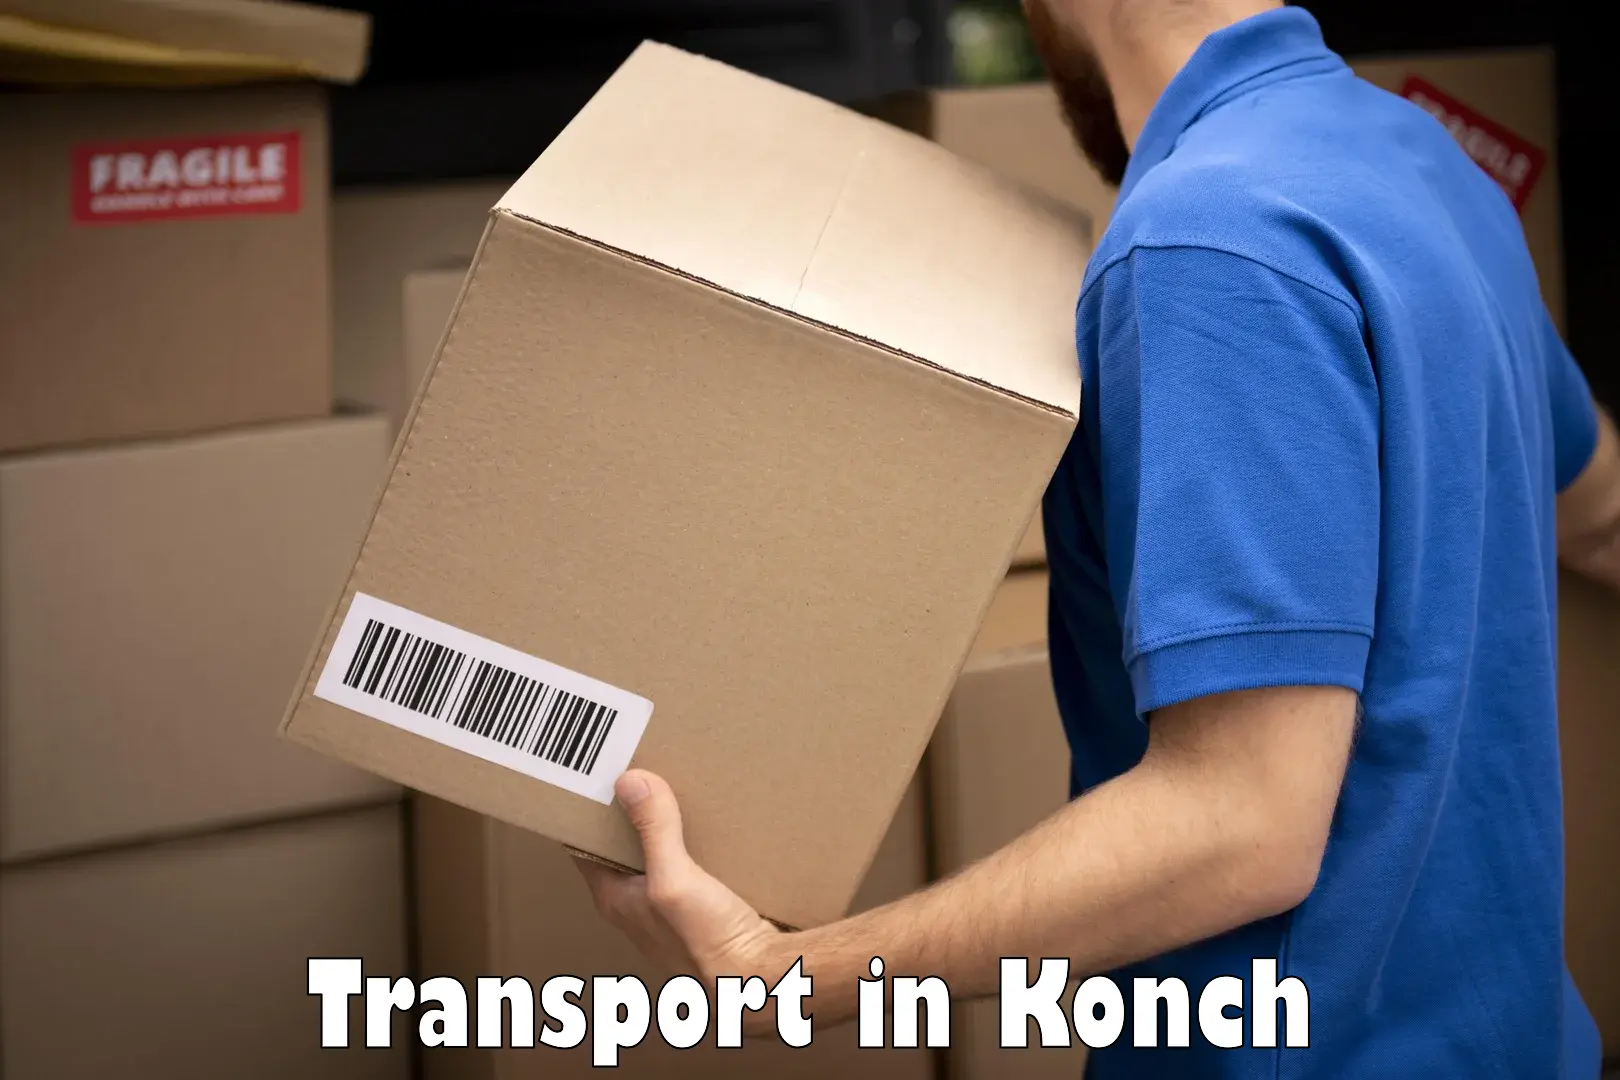 Transport shared services in Konch